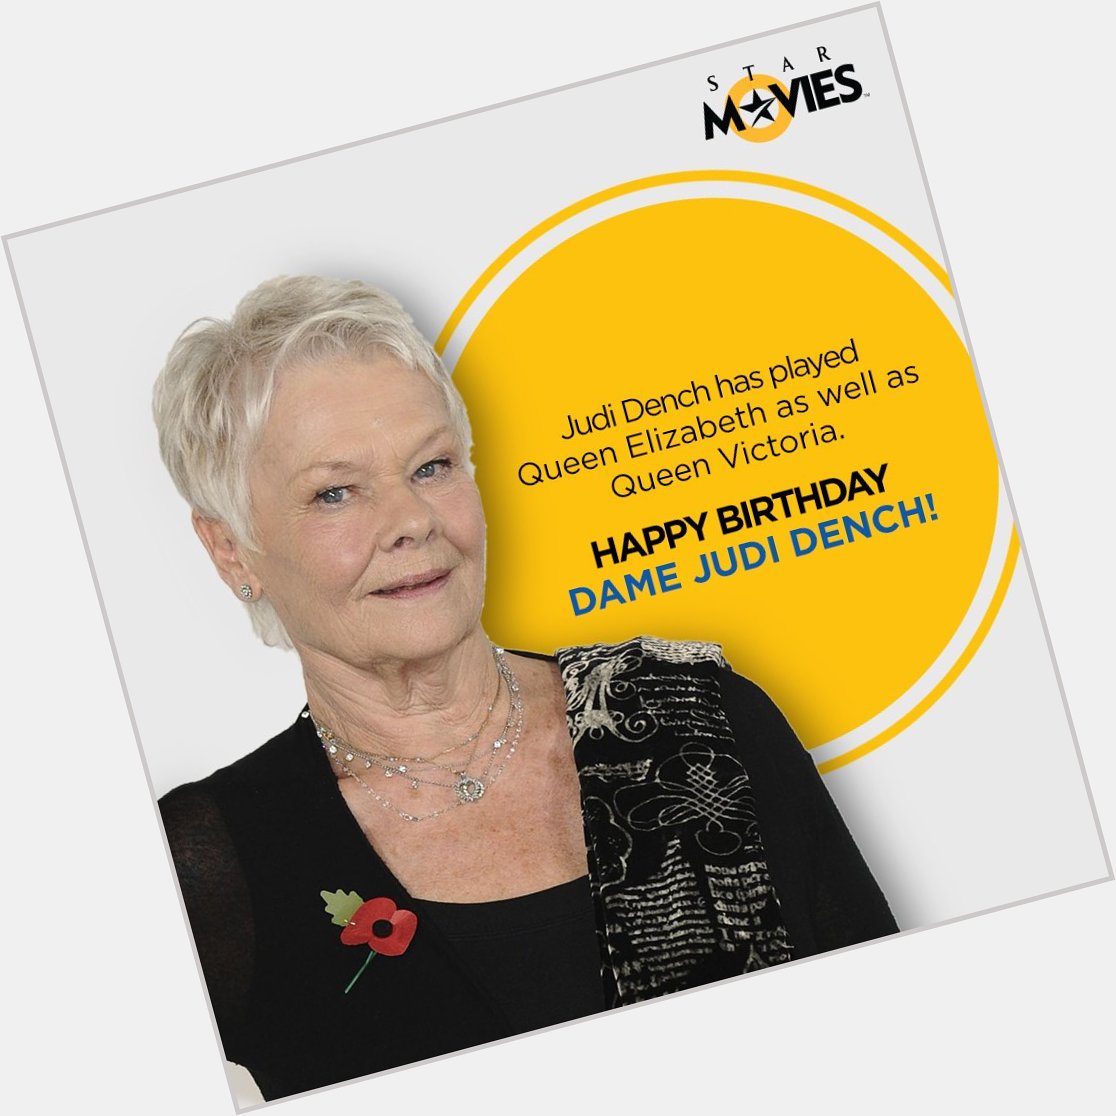 Quite the Royal! A very happy birthday to the beautiful and elegant Dame Judi Dench! 